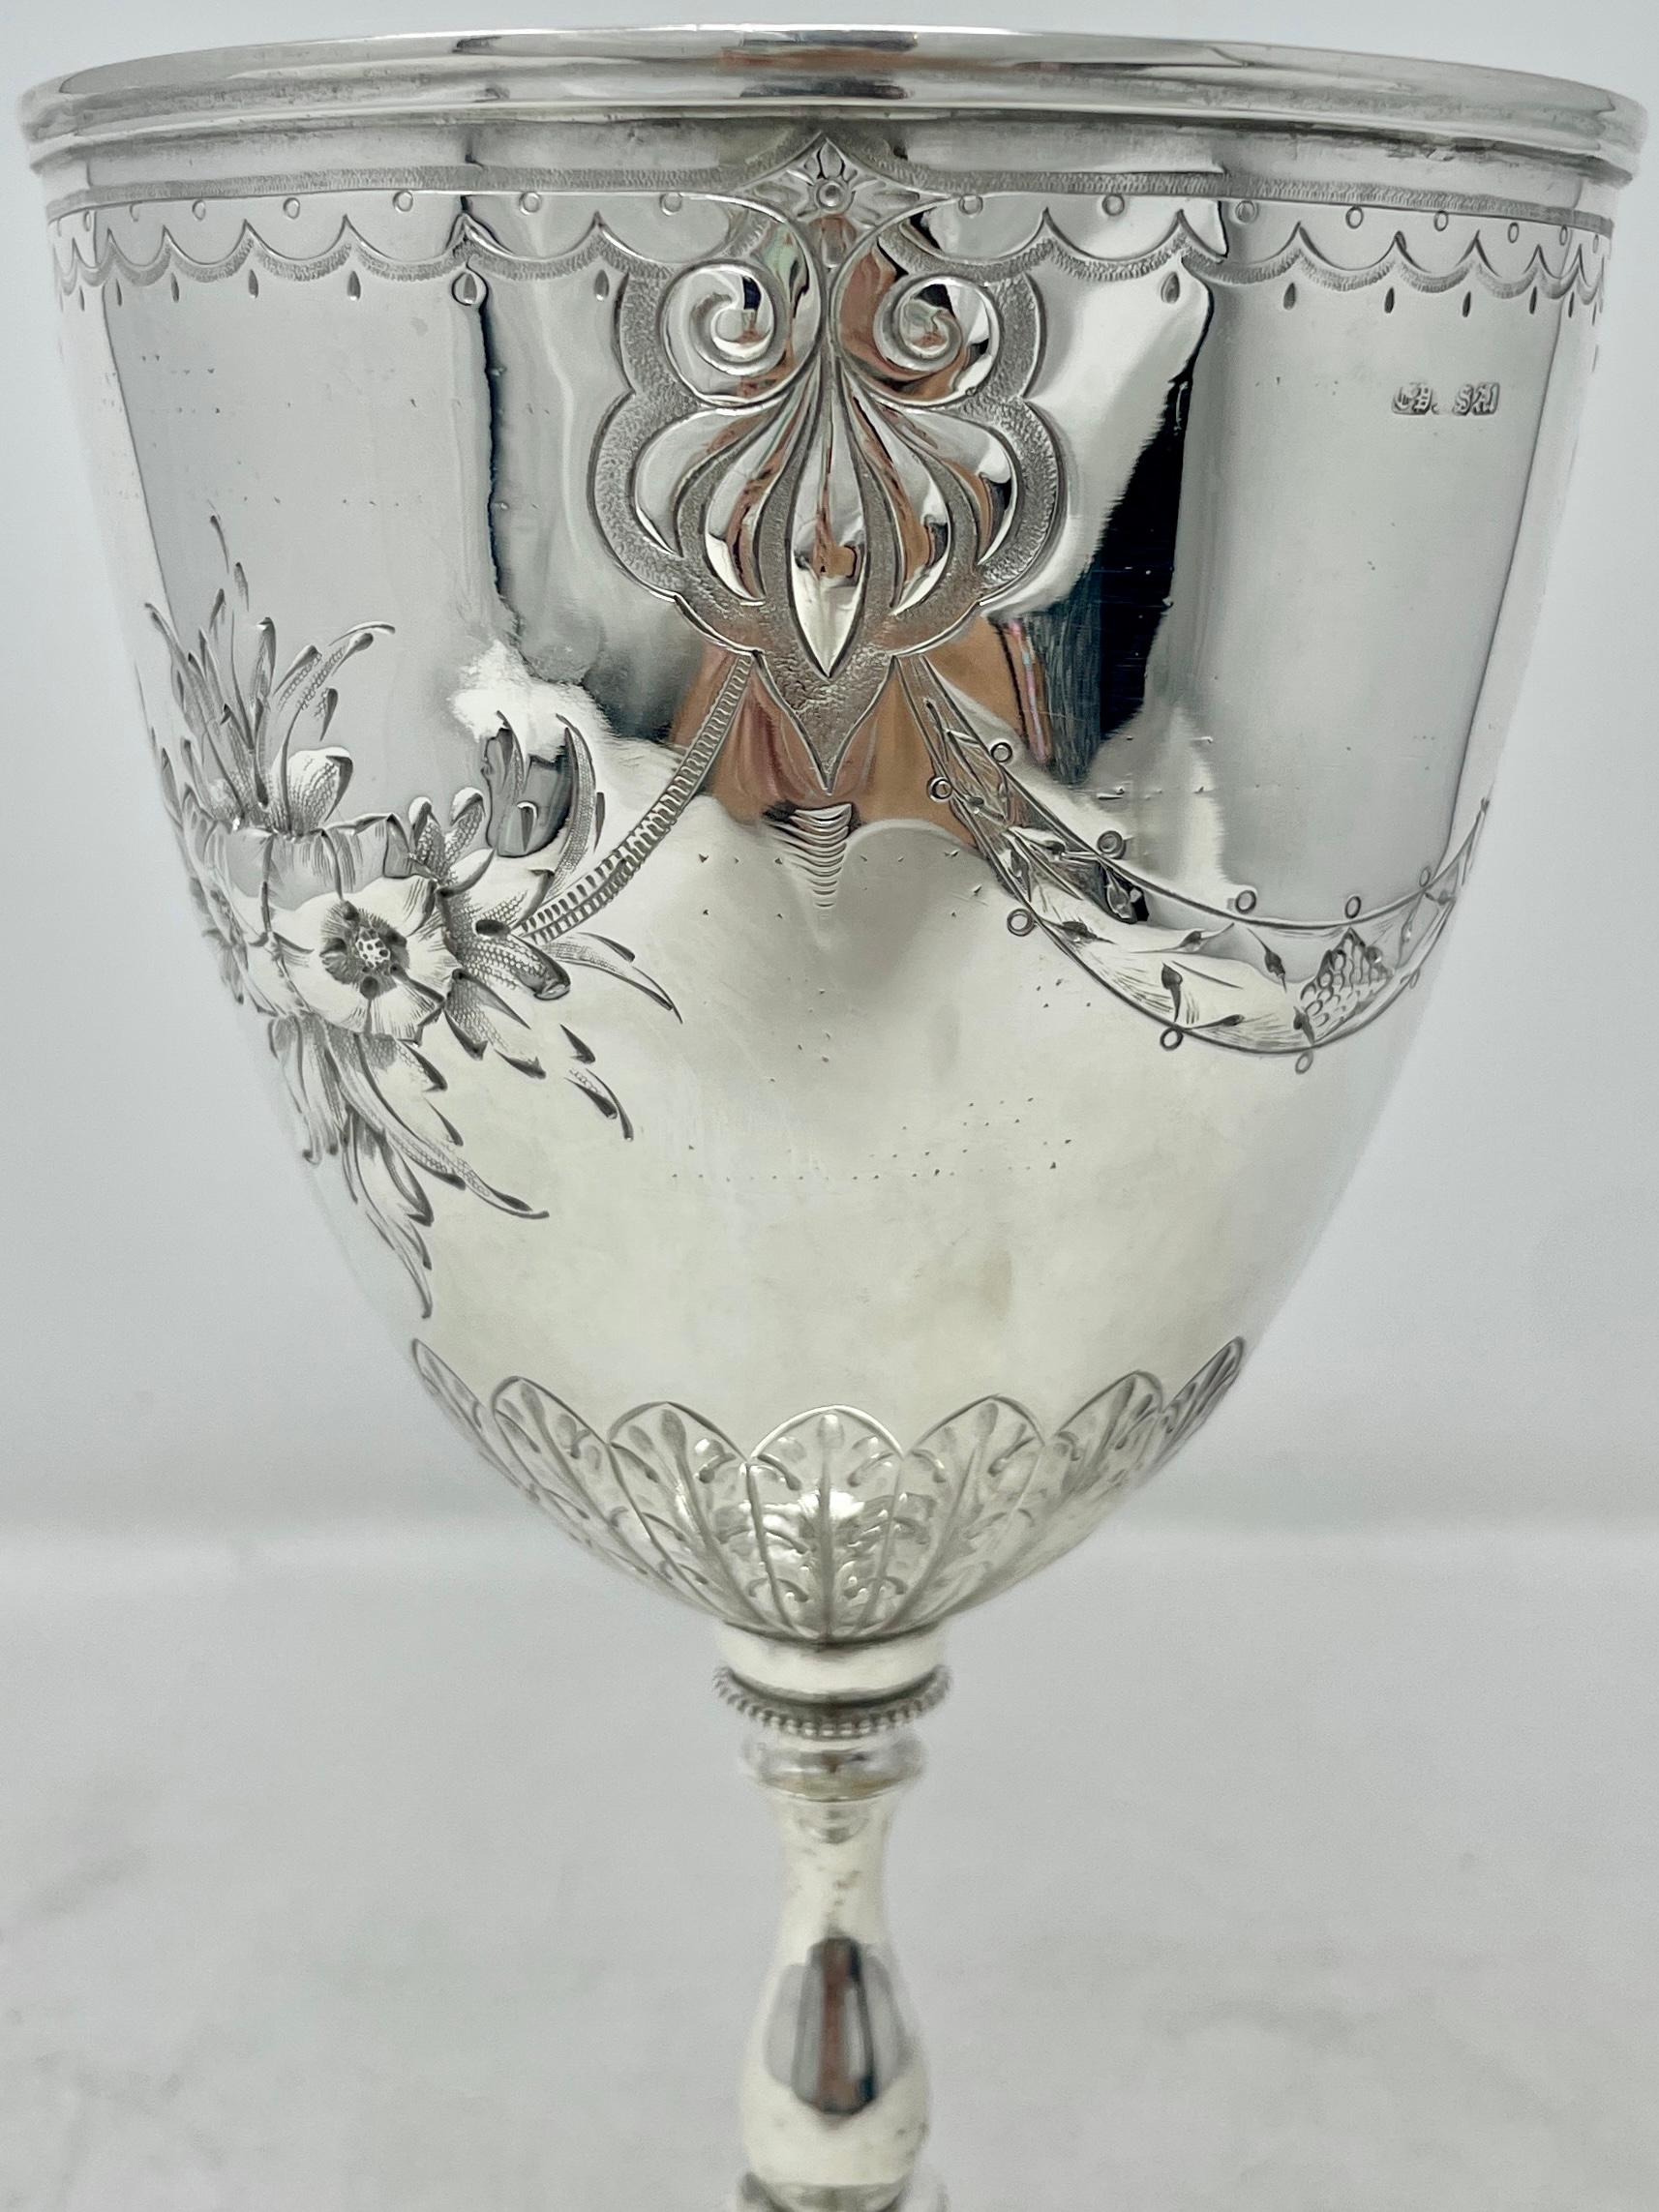 Antique English Victorian Chased Silver-Plated Goblet, Circa 1900. 1